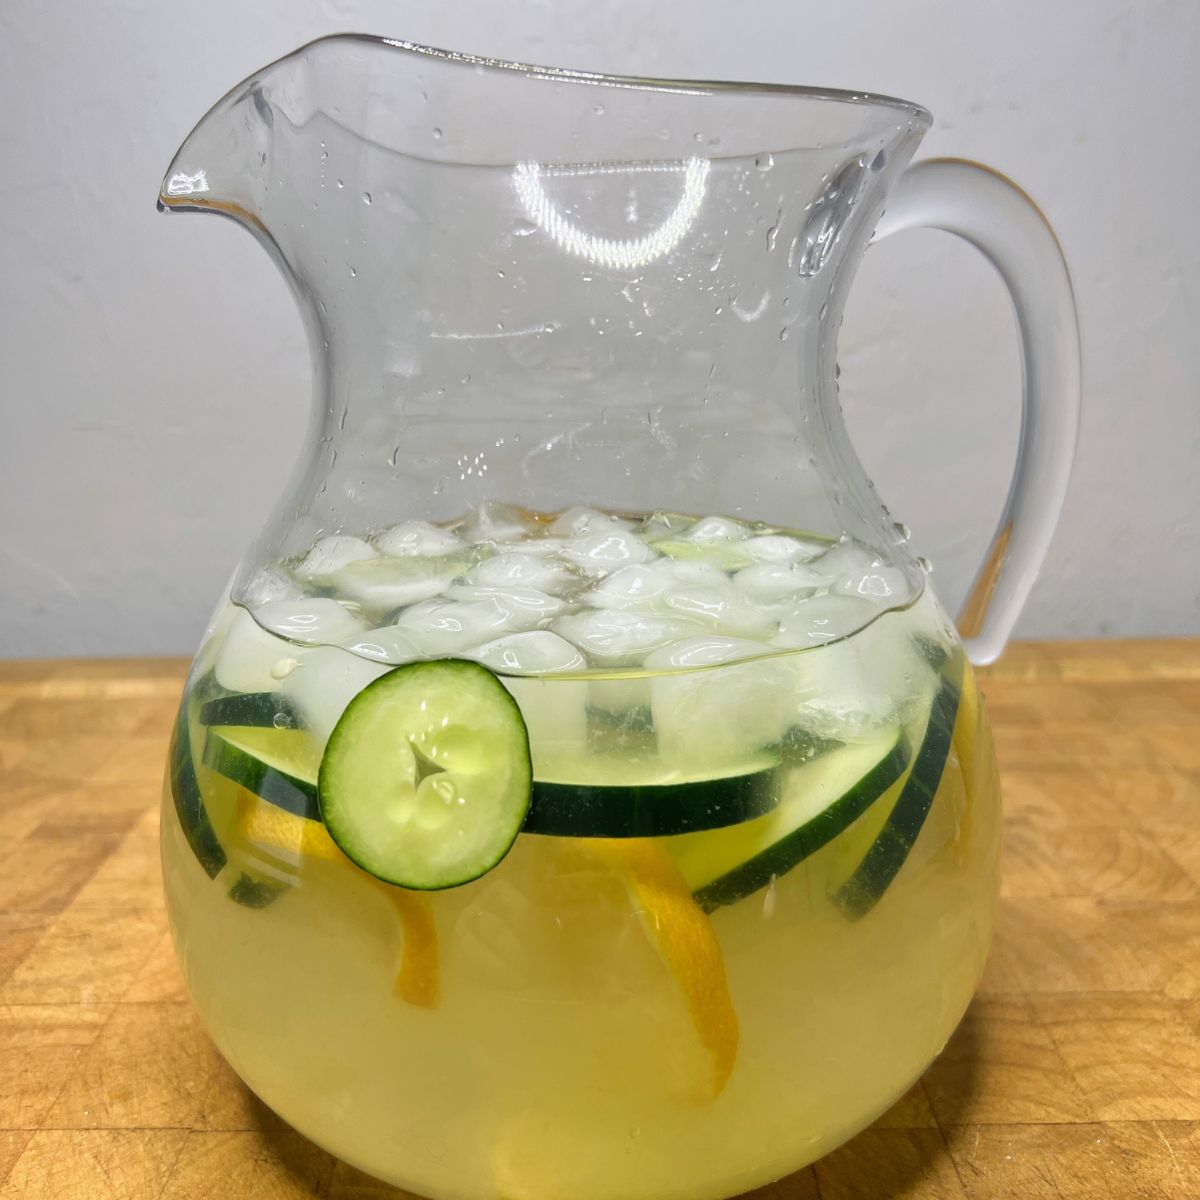 Cucumber lemon water in a pitcher on a wooden table.